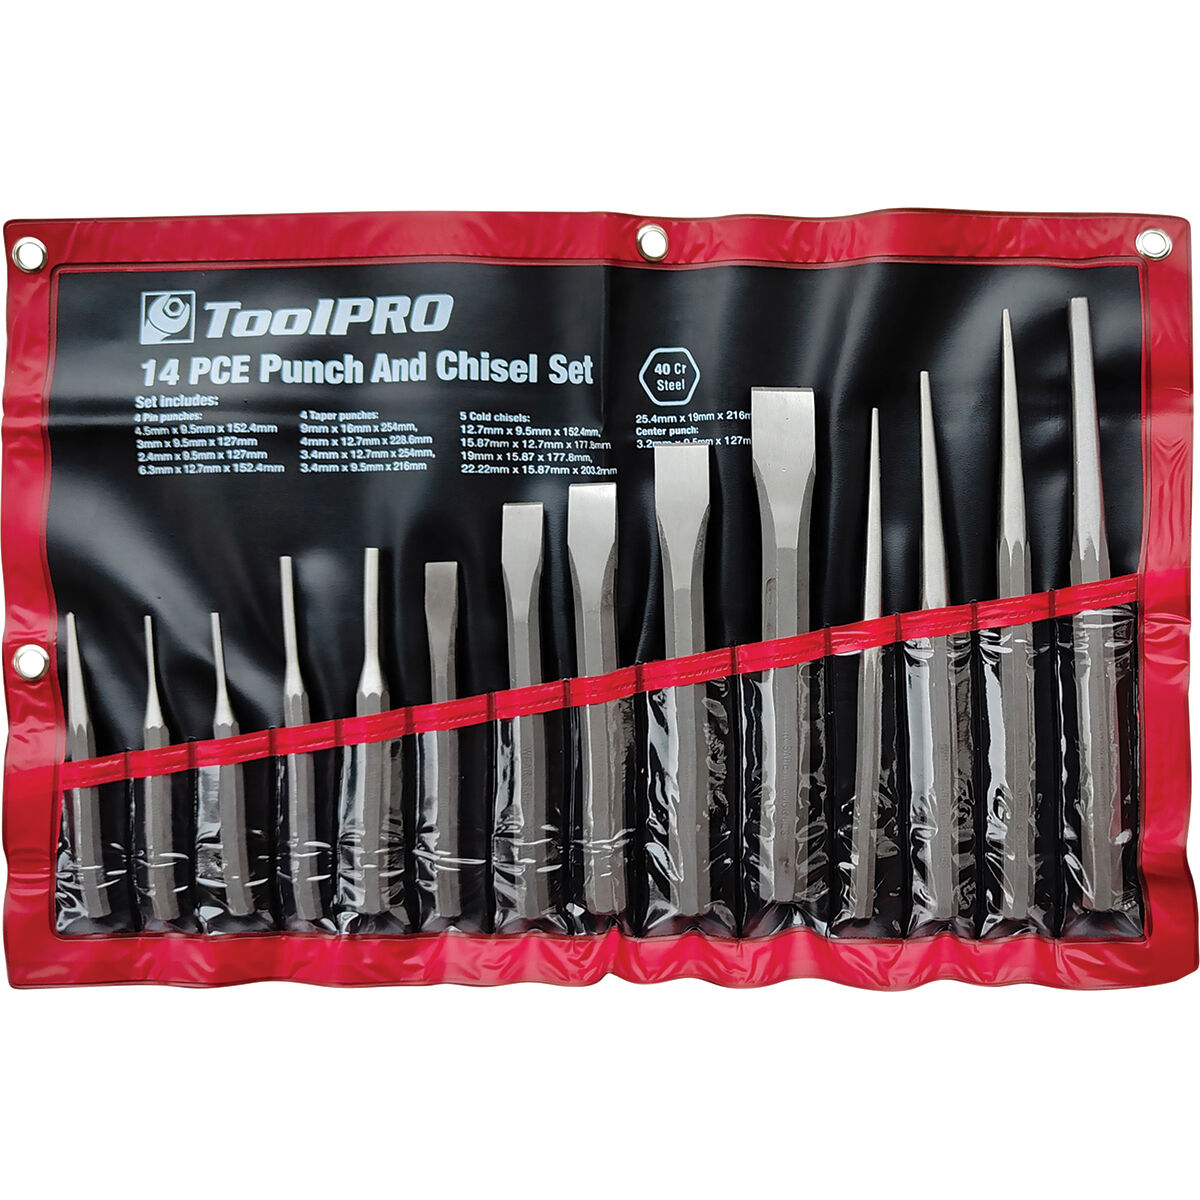 ToolPRO Punch & Chisel Set - 14 Piece, , scaau_hi-res